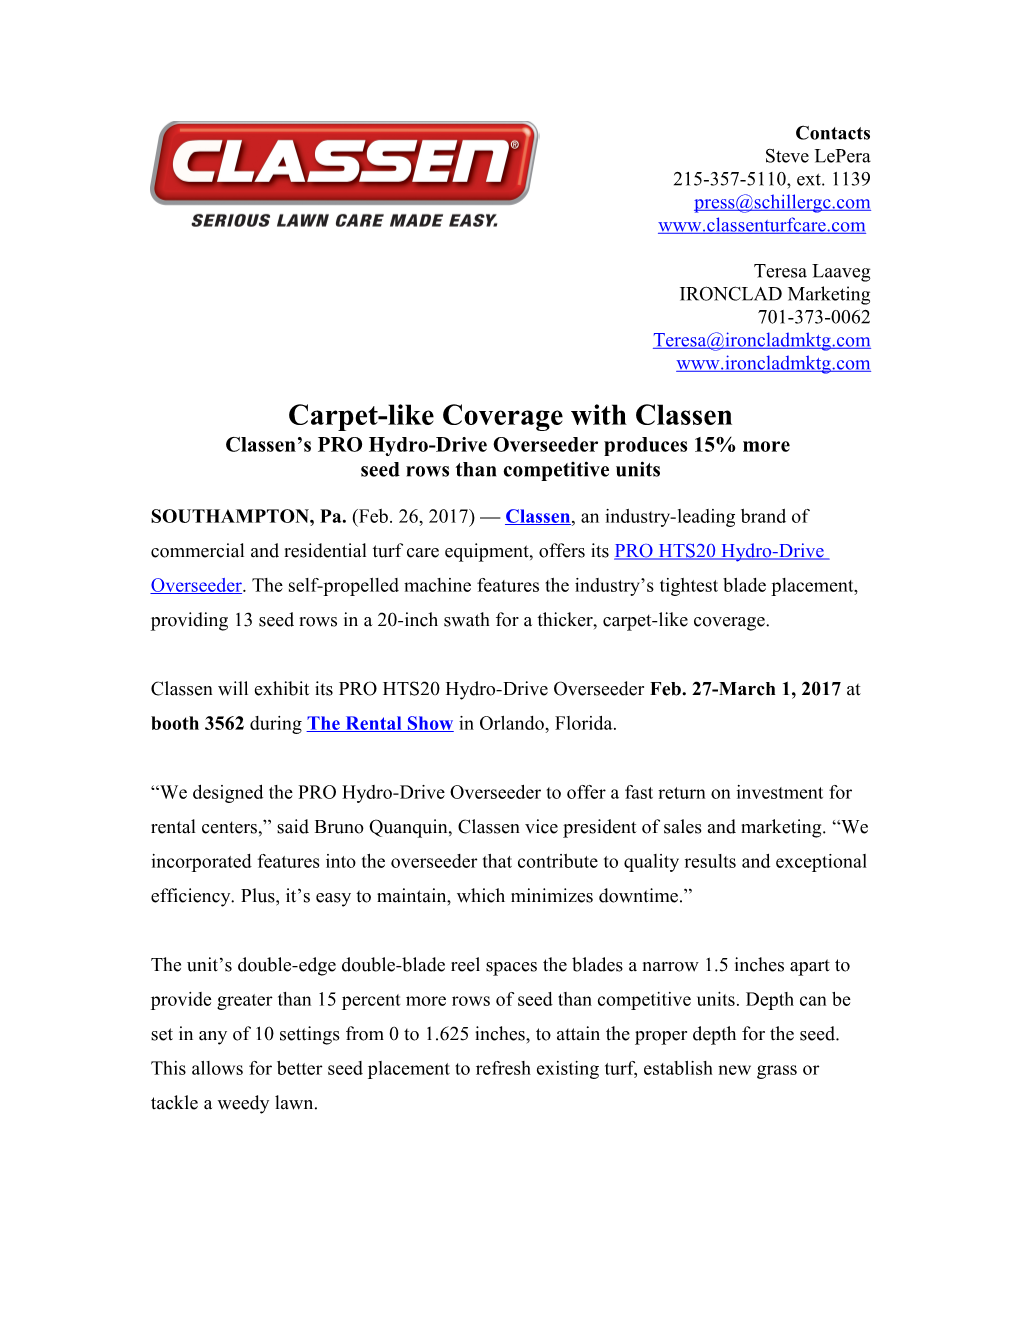 Carpet-Like Coverage with Classen